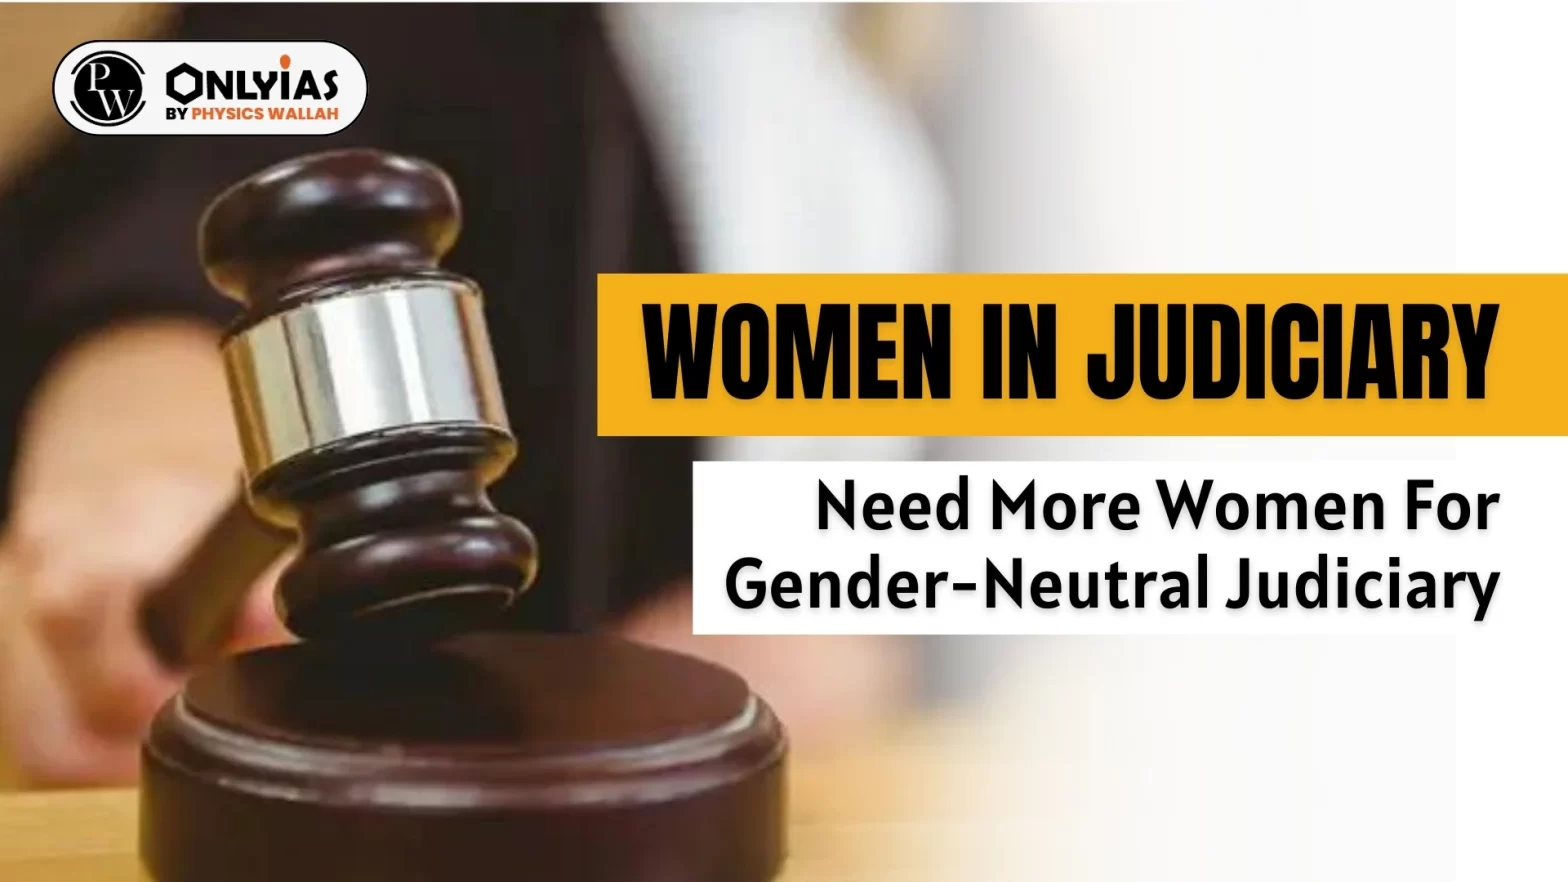 Women in Judiciary: Need More Women For Gender-Neutral Judiciary